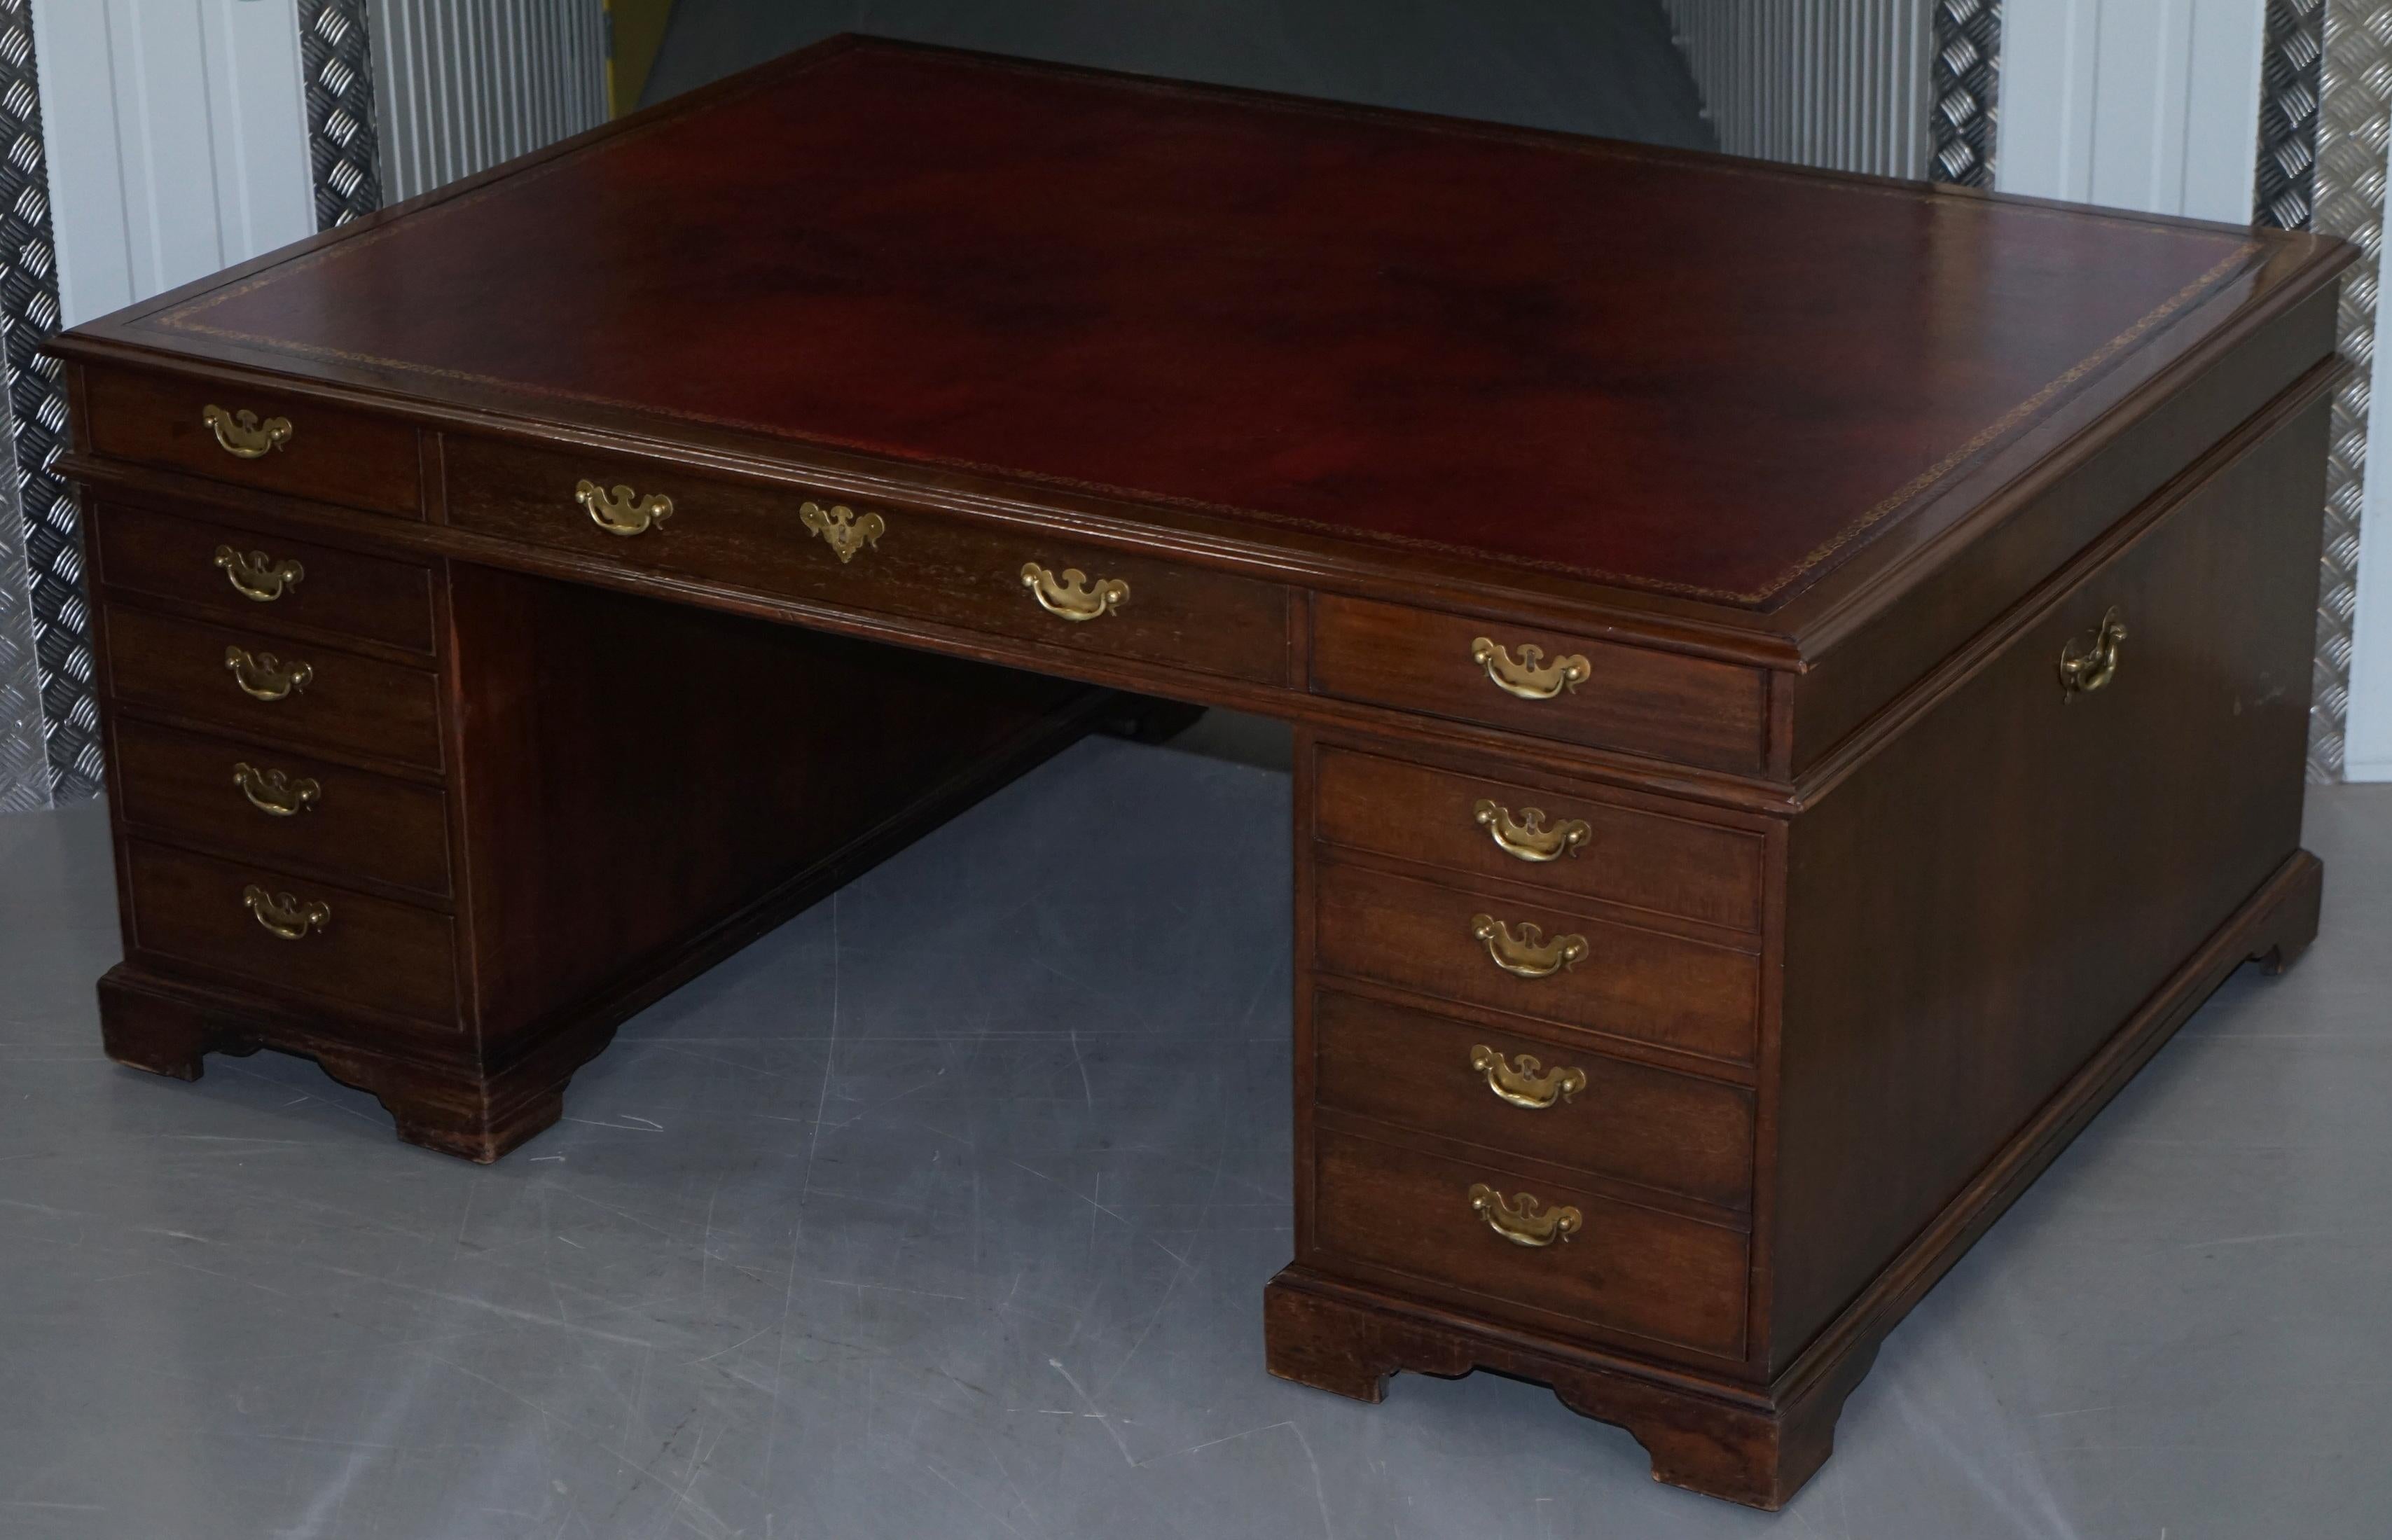 We are delighted to offer for sale this huge Victorian twin pedestal 18-drawer double sided mahogany partner desk with oxblood leather top

This desk is monumental, originally designed as you can see for two people to share, the depth of this desk